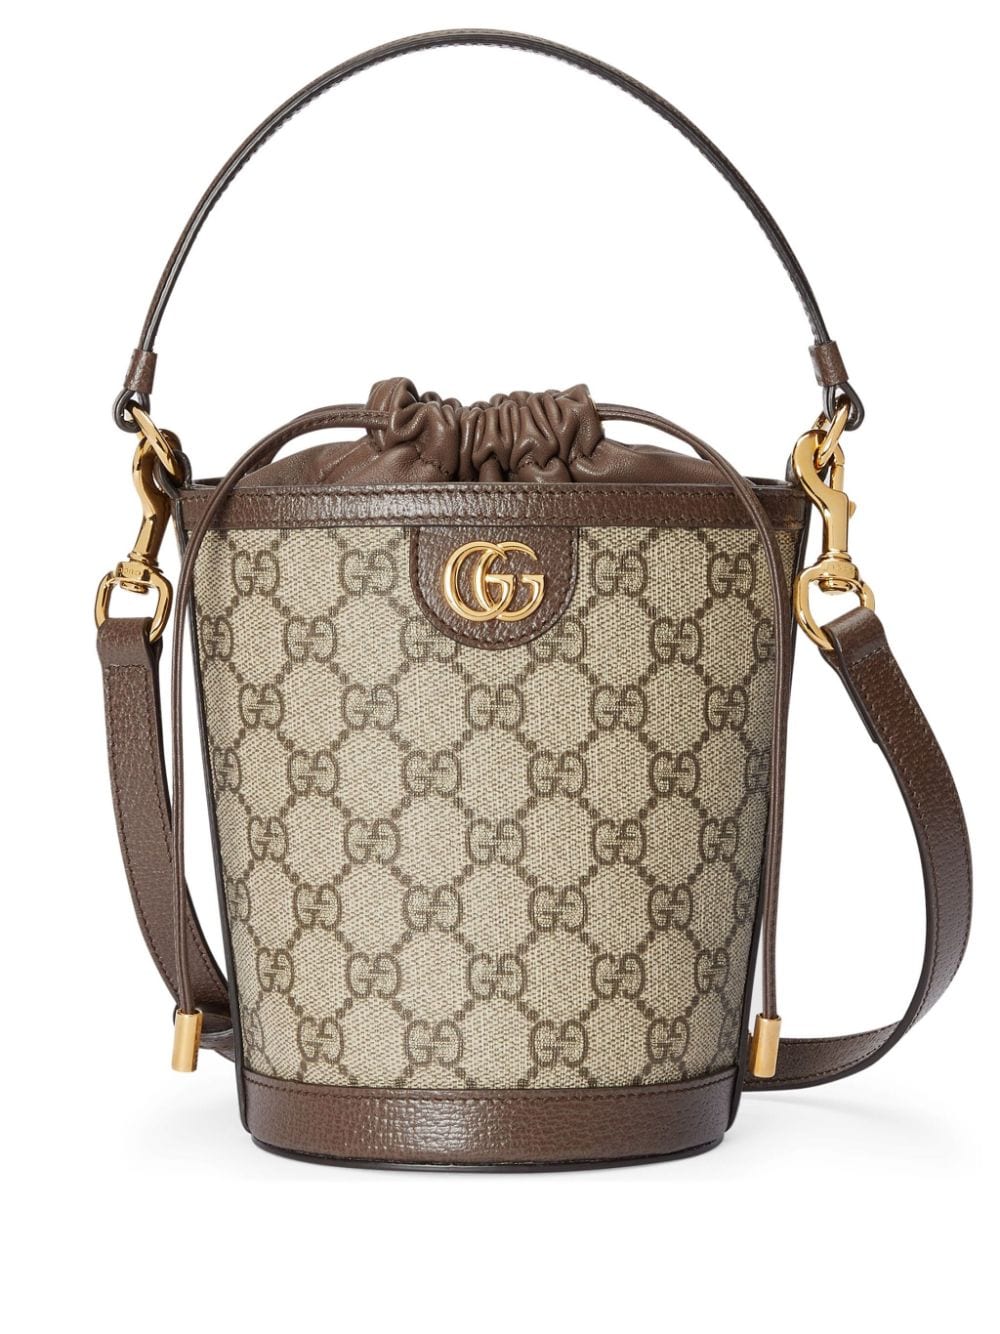 GUCCI Tan Mini Bucket Crossbody Handbag with Golden Accents and Brown Leather Trims, 11.5x20x8cm